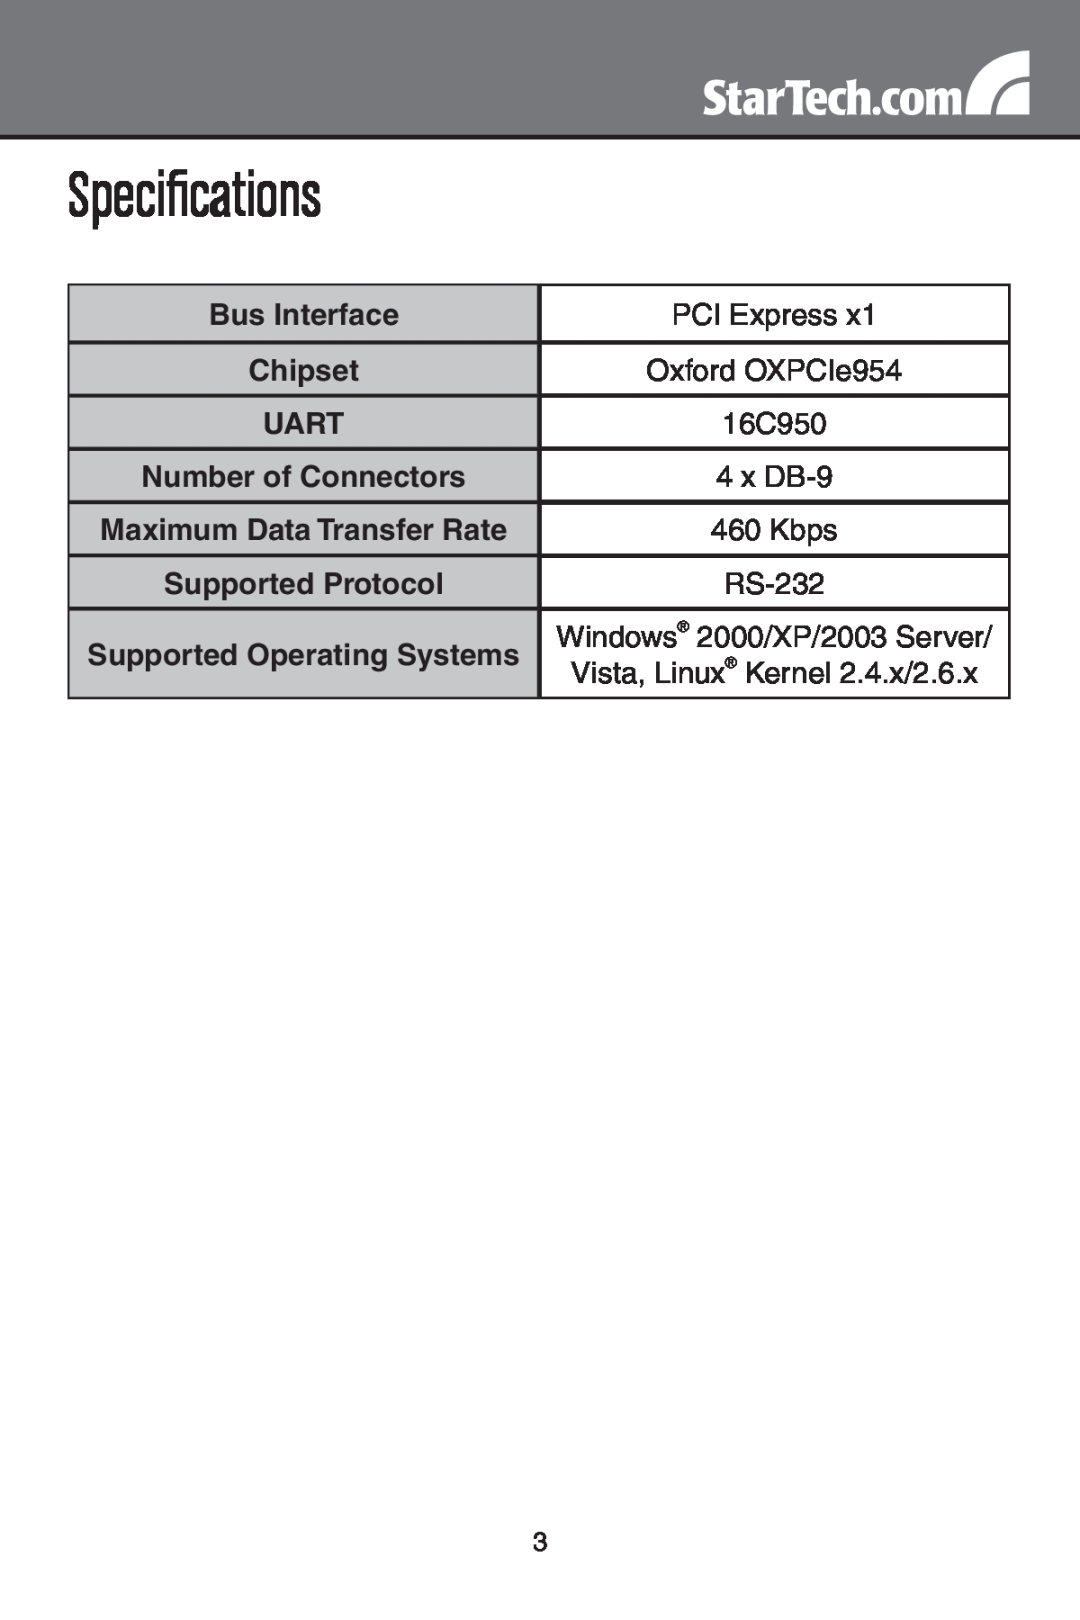 StarTech.com PEX4S952 Specifications, Bus Interface, Chipset, Uart, Number of Connectors, x DB-9, Kbps, Supported Protocol 